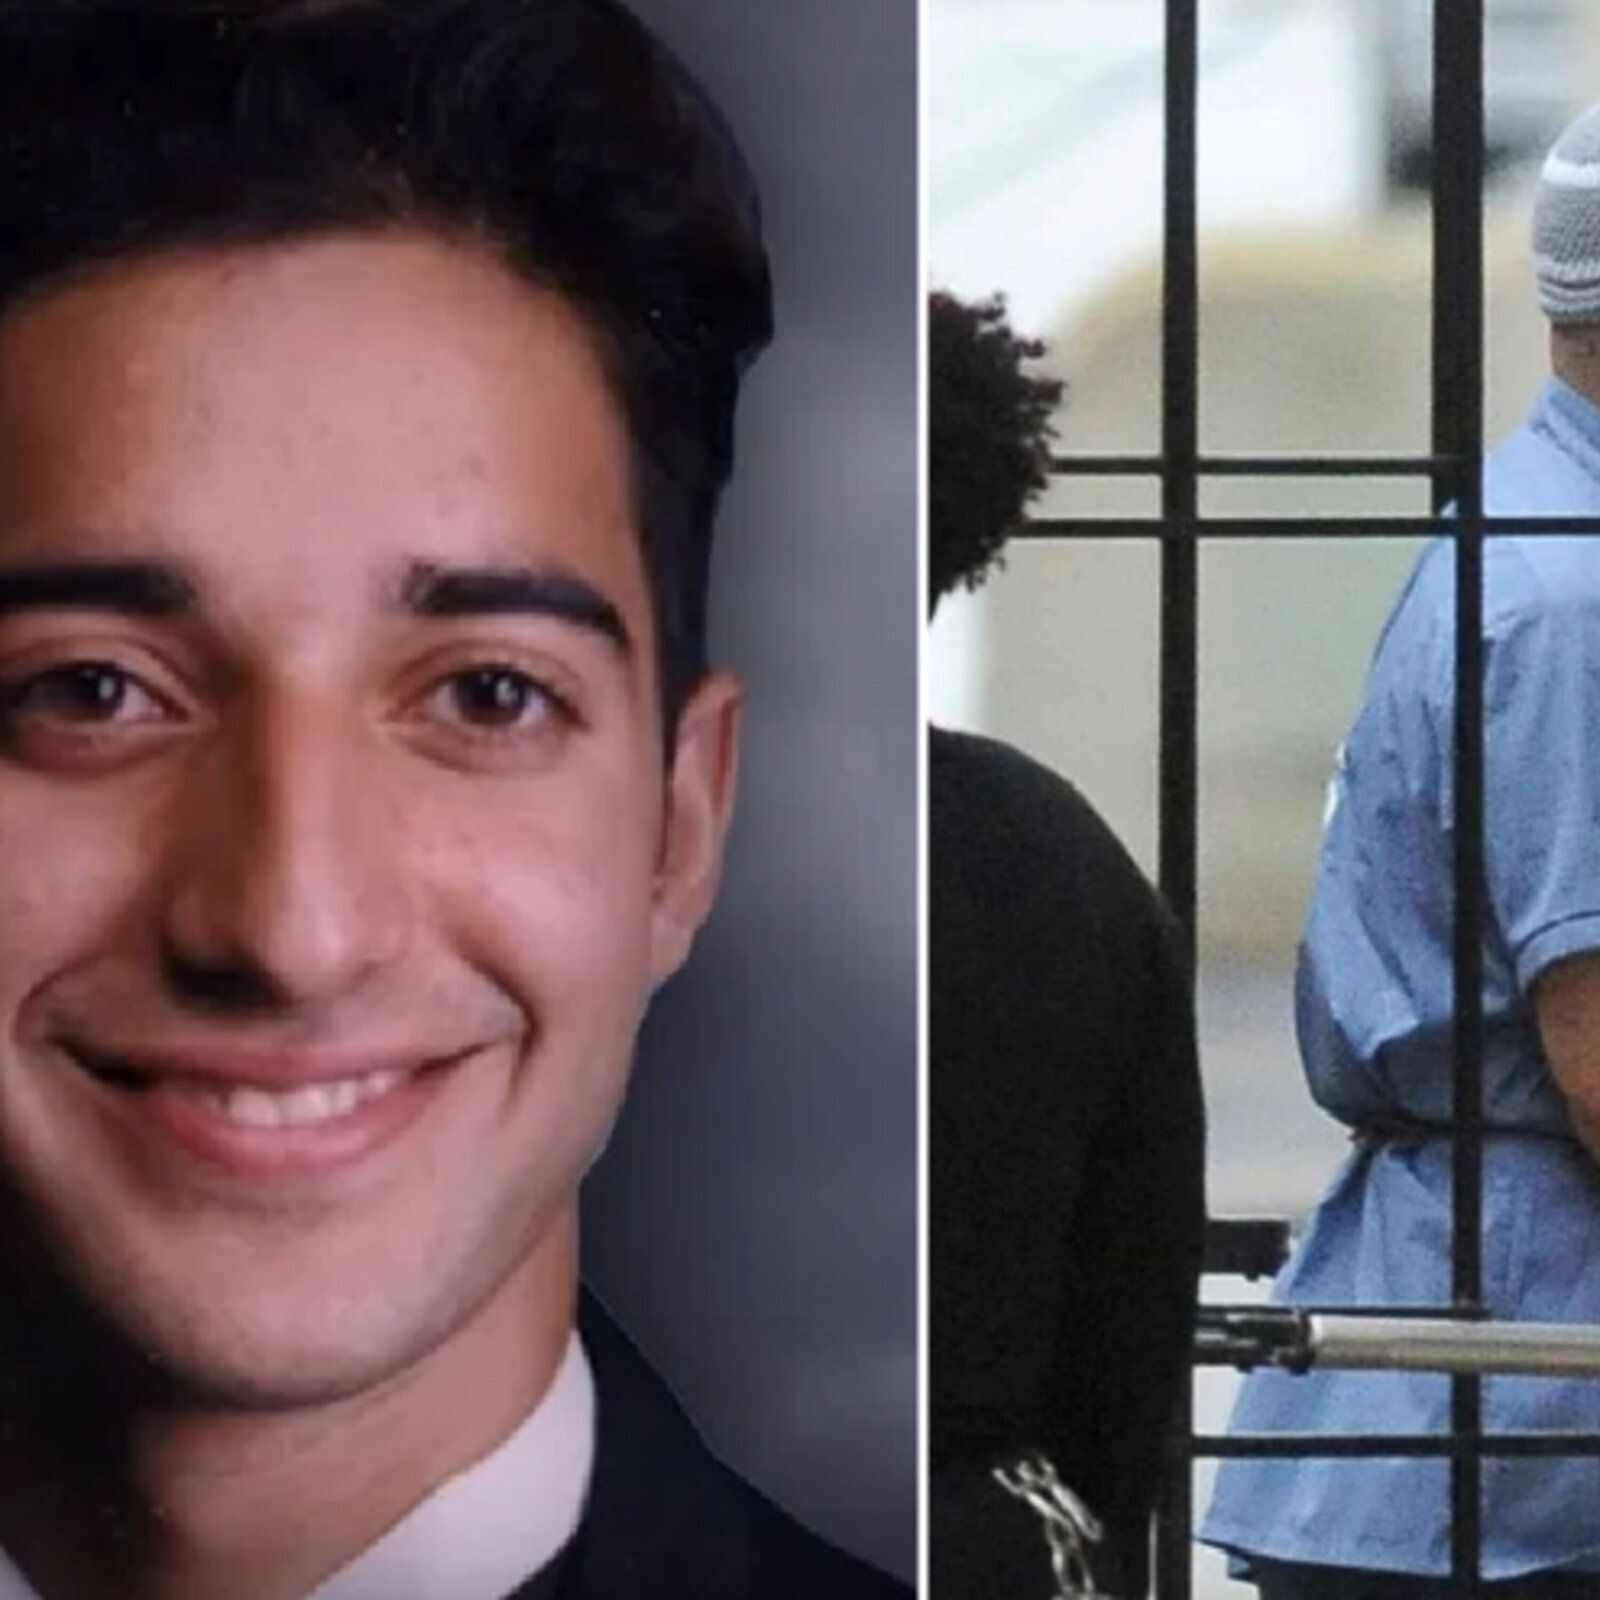 S1 Ep1: S1, The State v. Adnan Syed - Episode 1 - Adnan's Day (Relaunch)